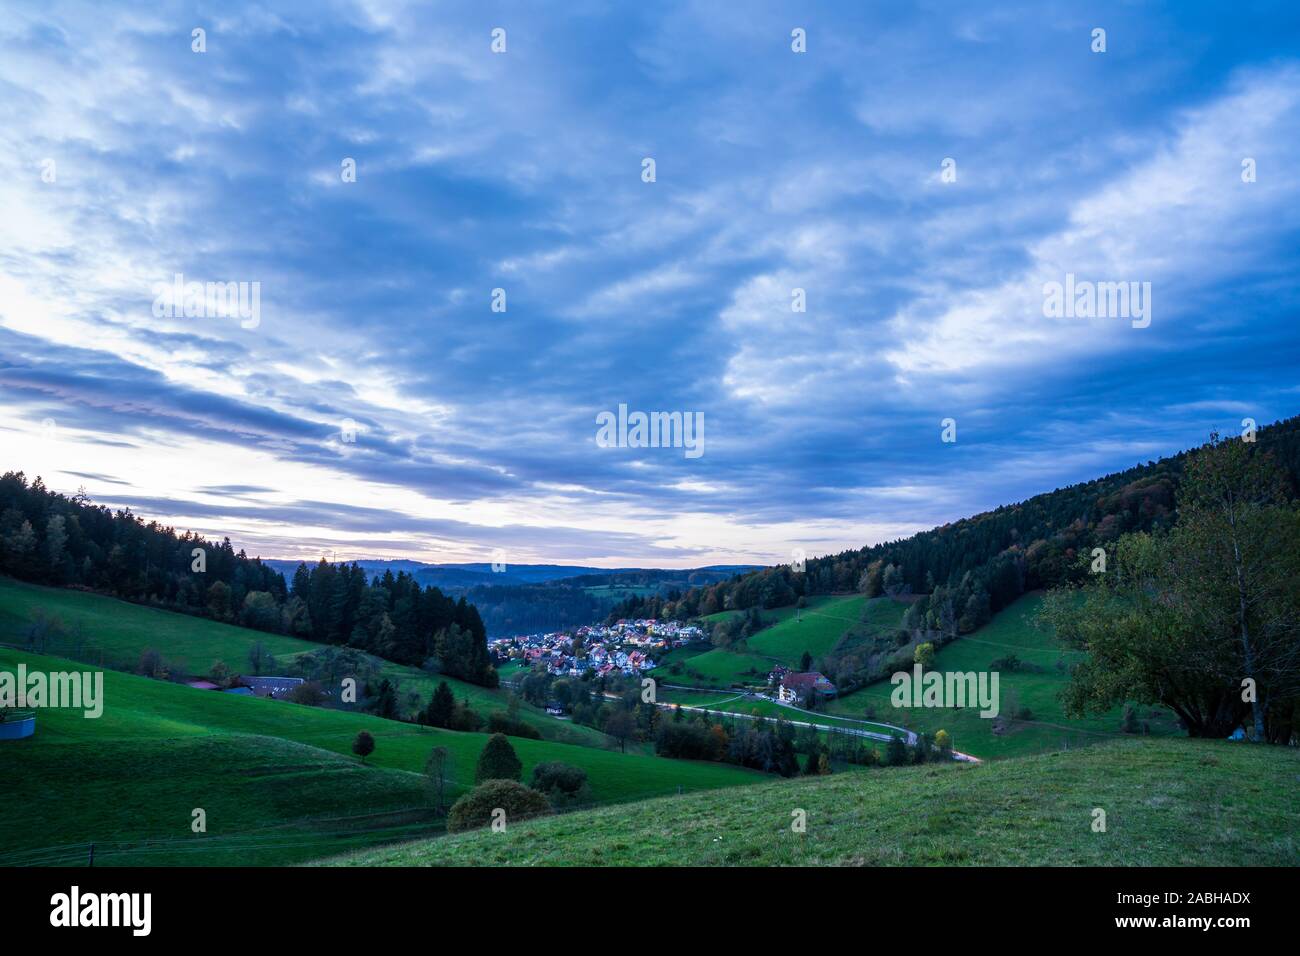 Germany, Black forest village idyl, elzach houses and streets in valley surrounded by conifer trees at sunset, view above green hills after sunset Stock Photo